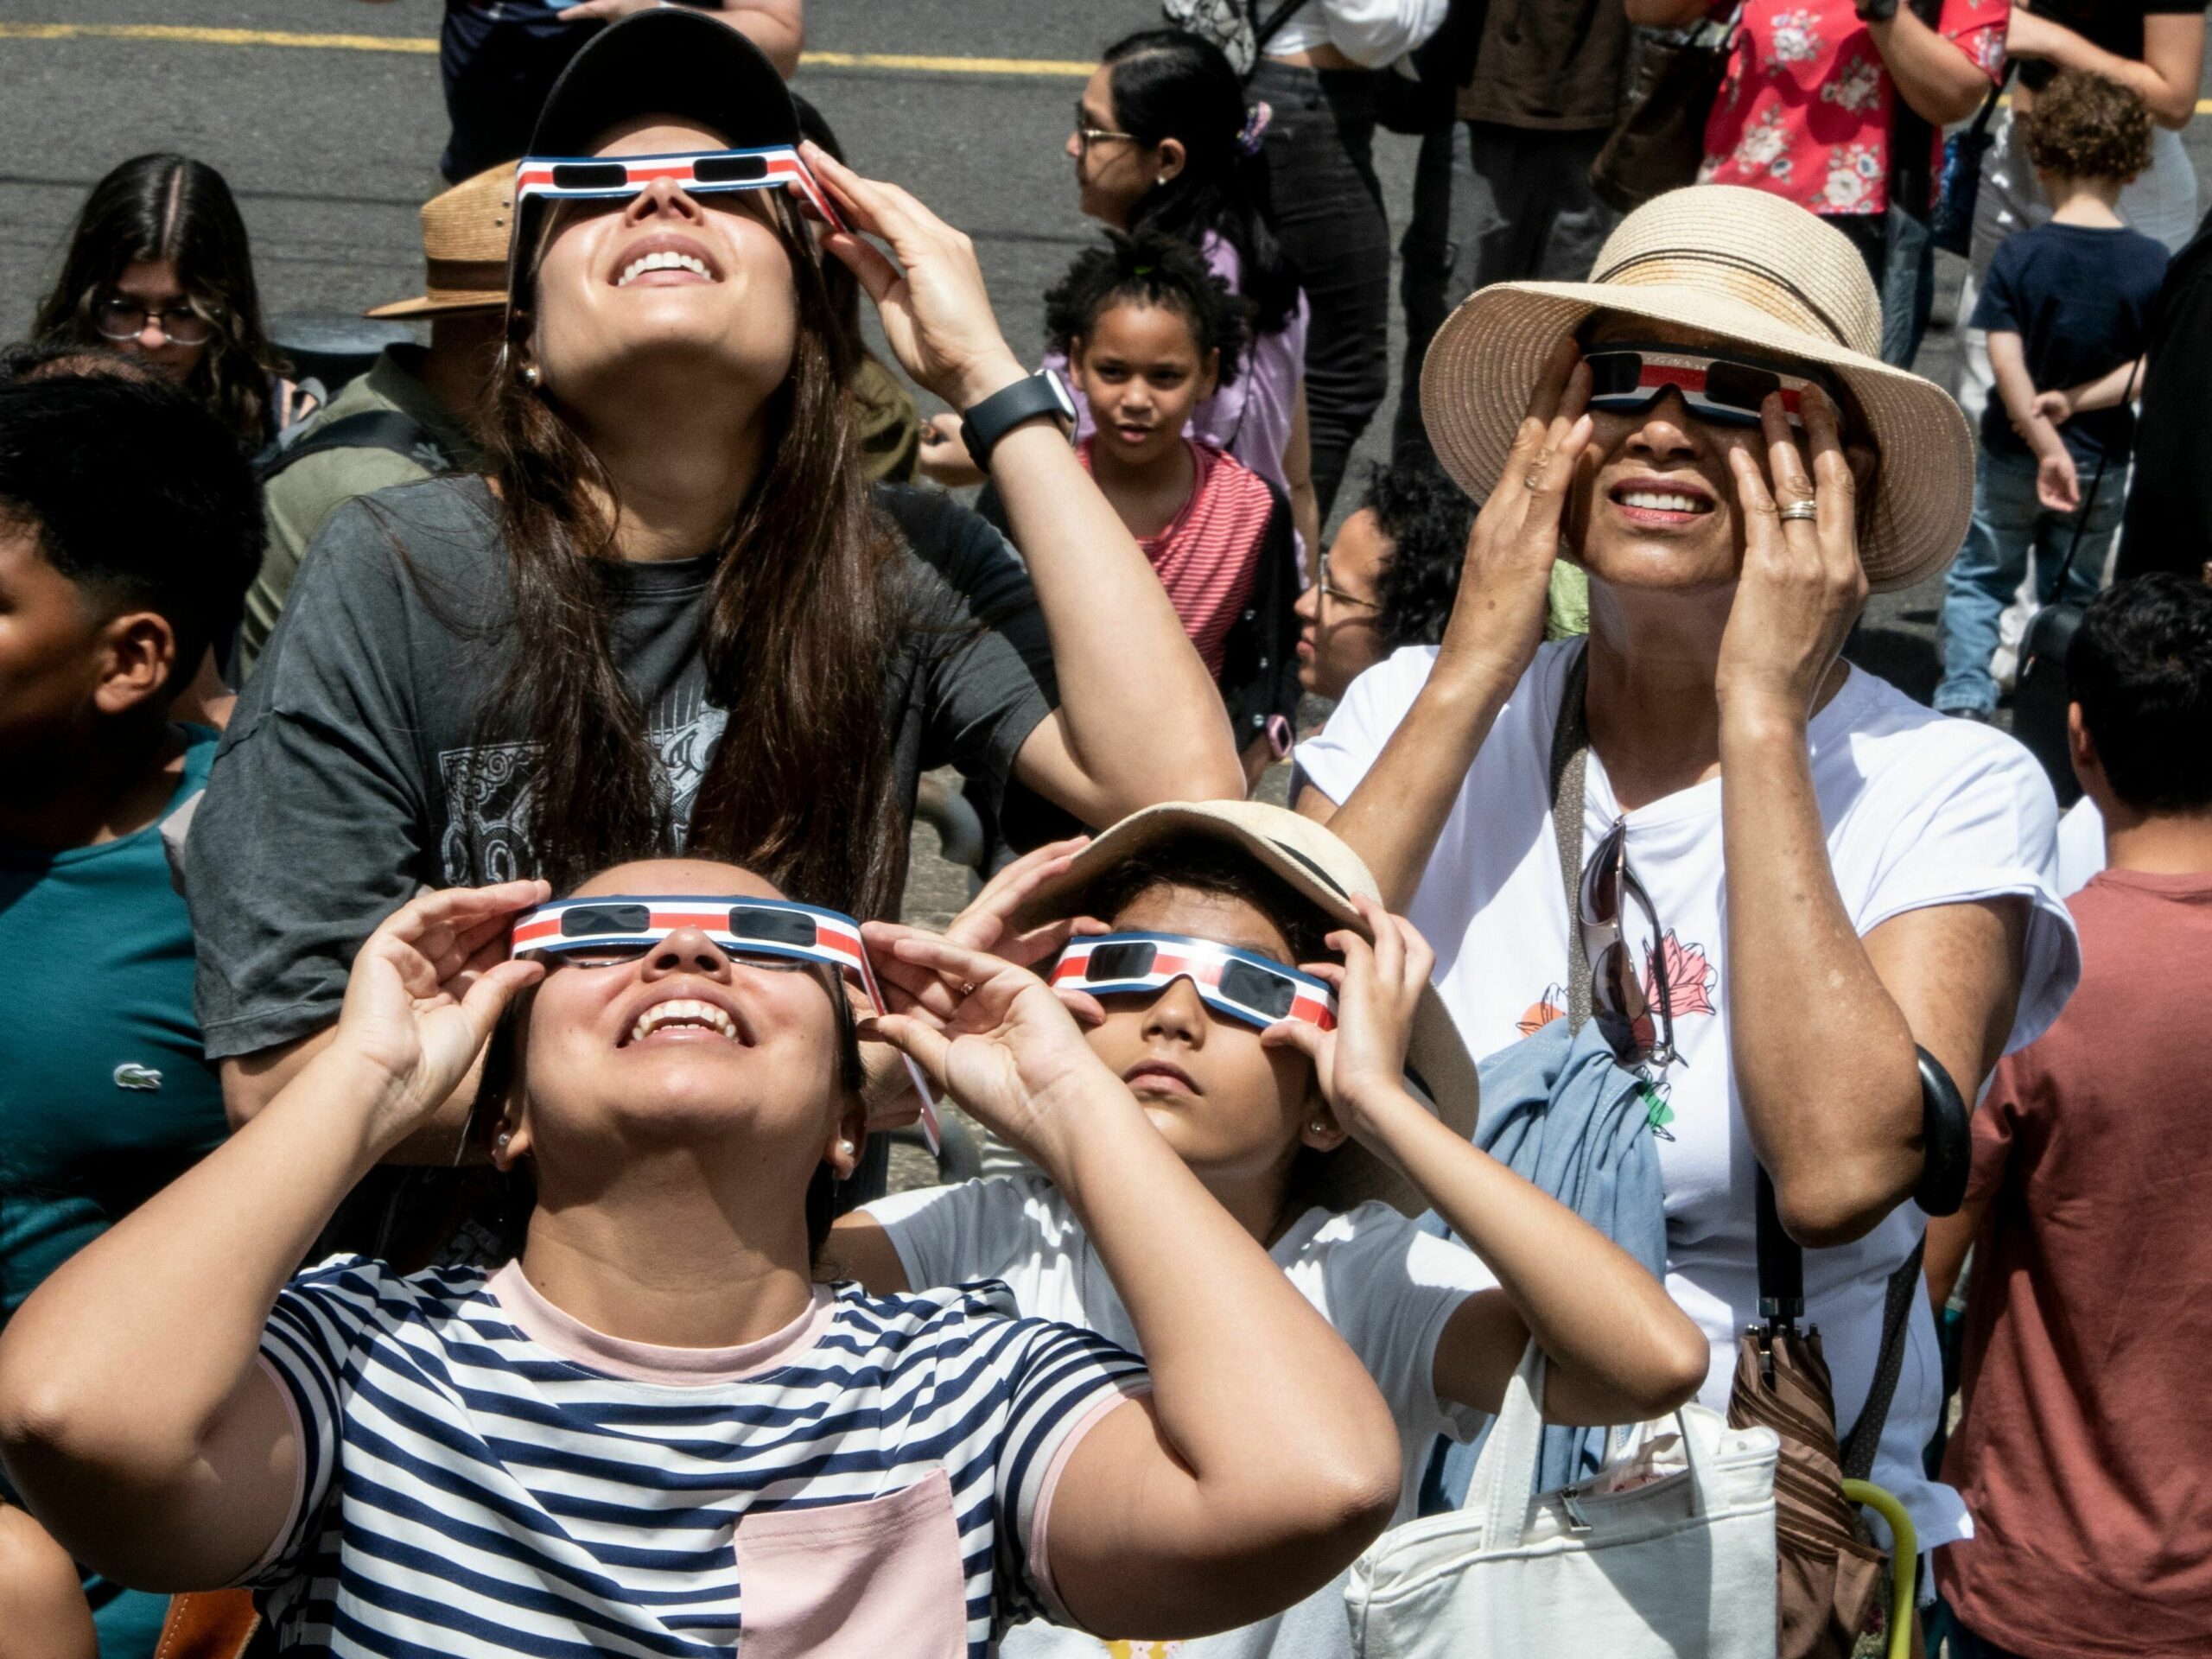 Where are you going to view the solar eclipse? NPR wants to know.